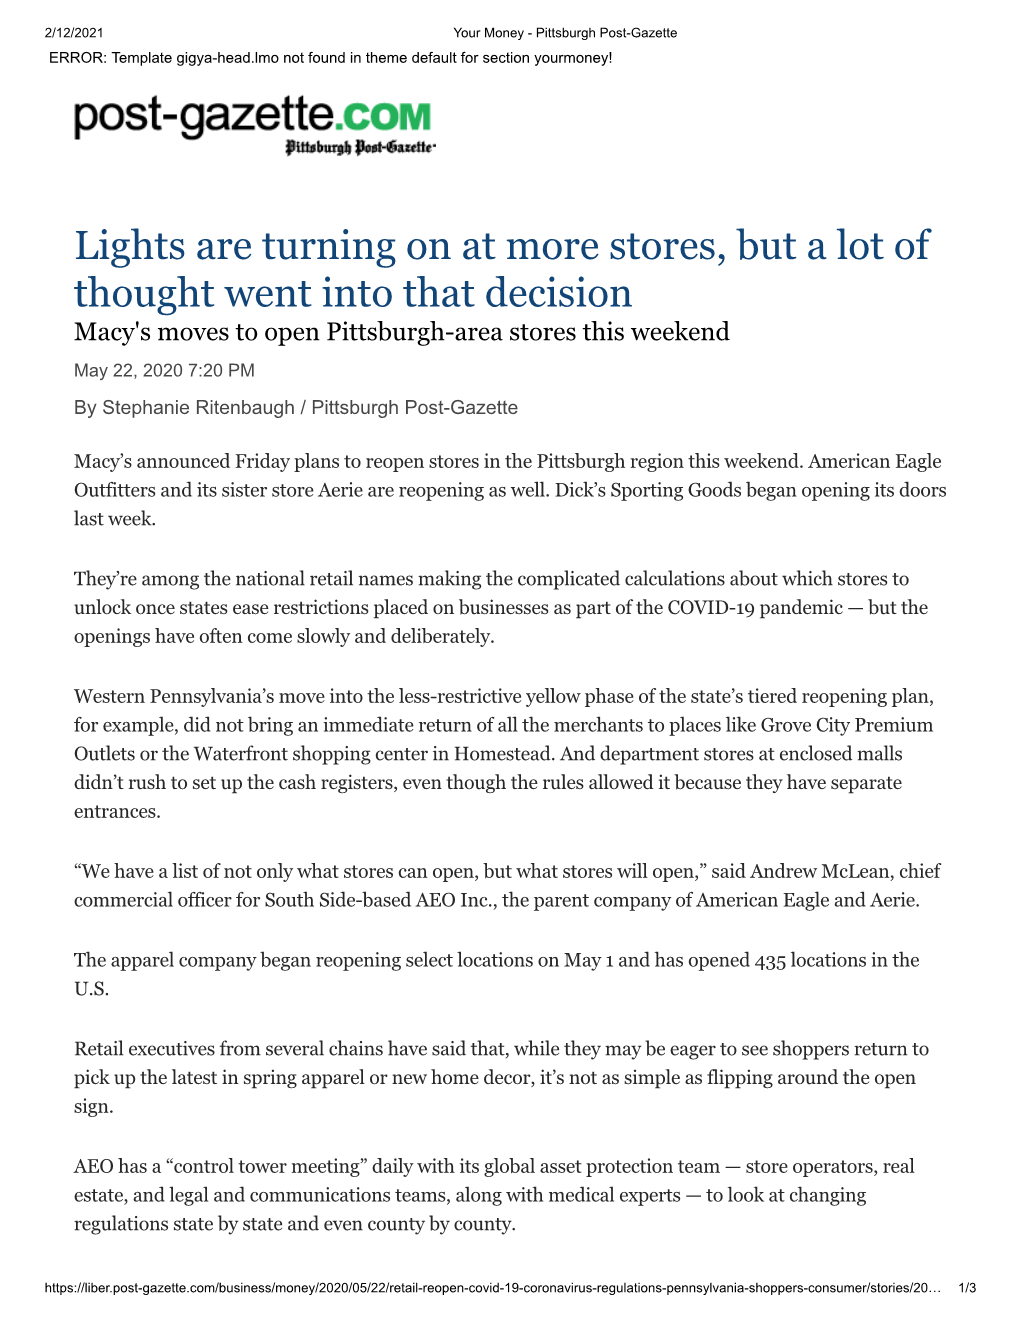 Lights Are Turning on at More Stores, but a Lot of Thought Went Into That Decision